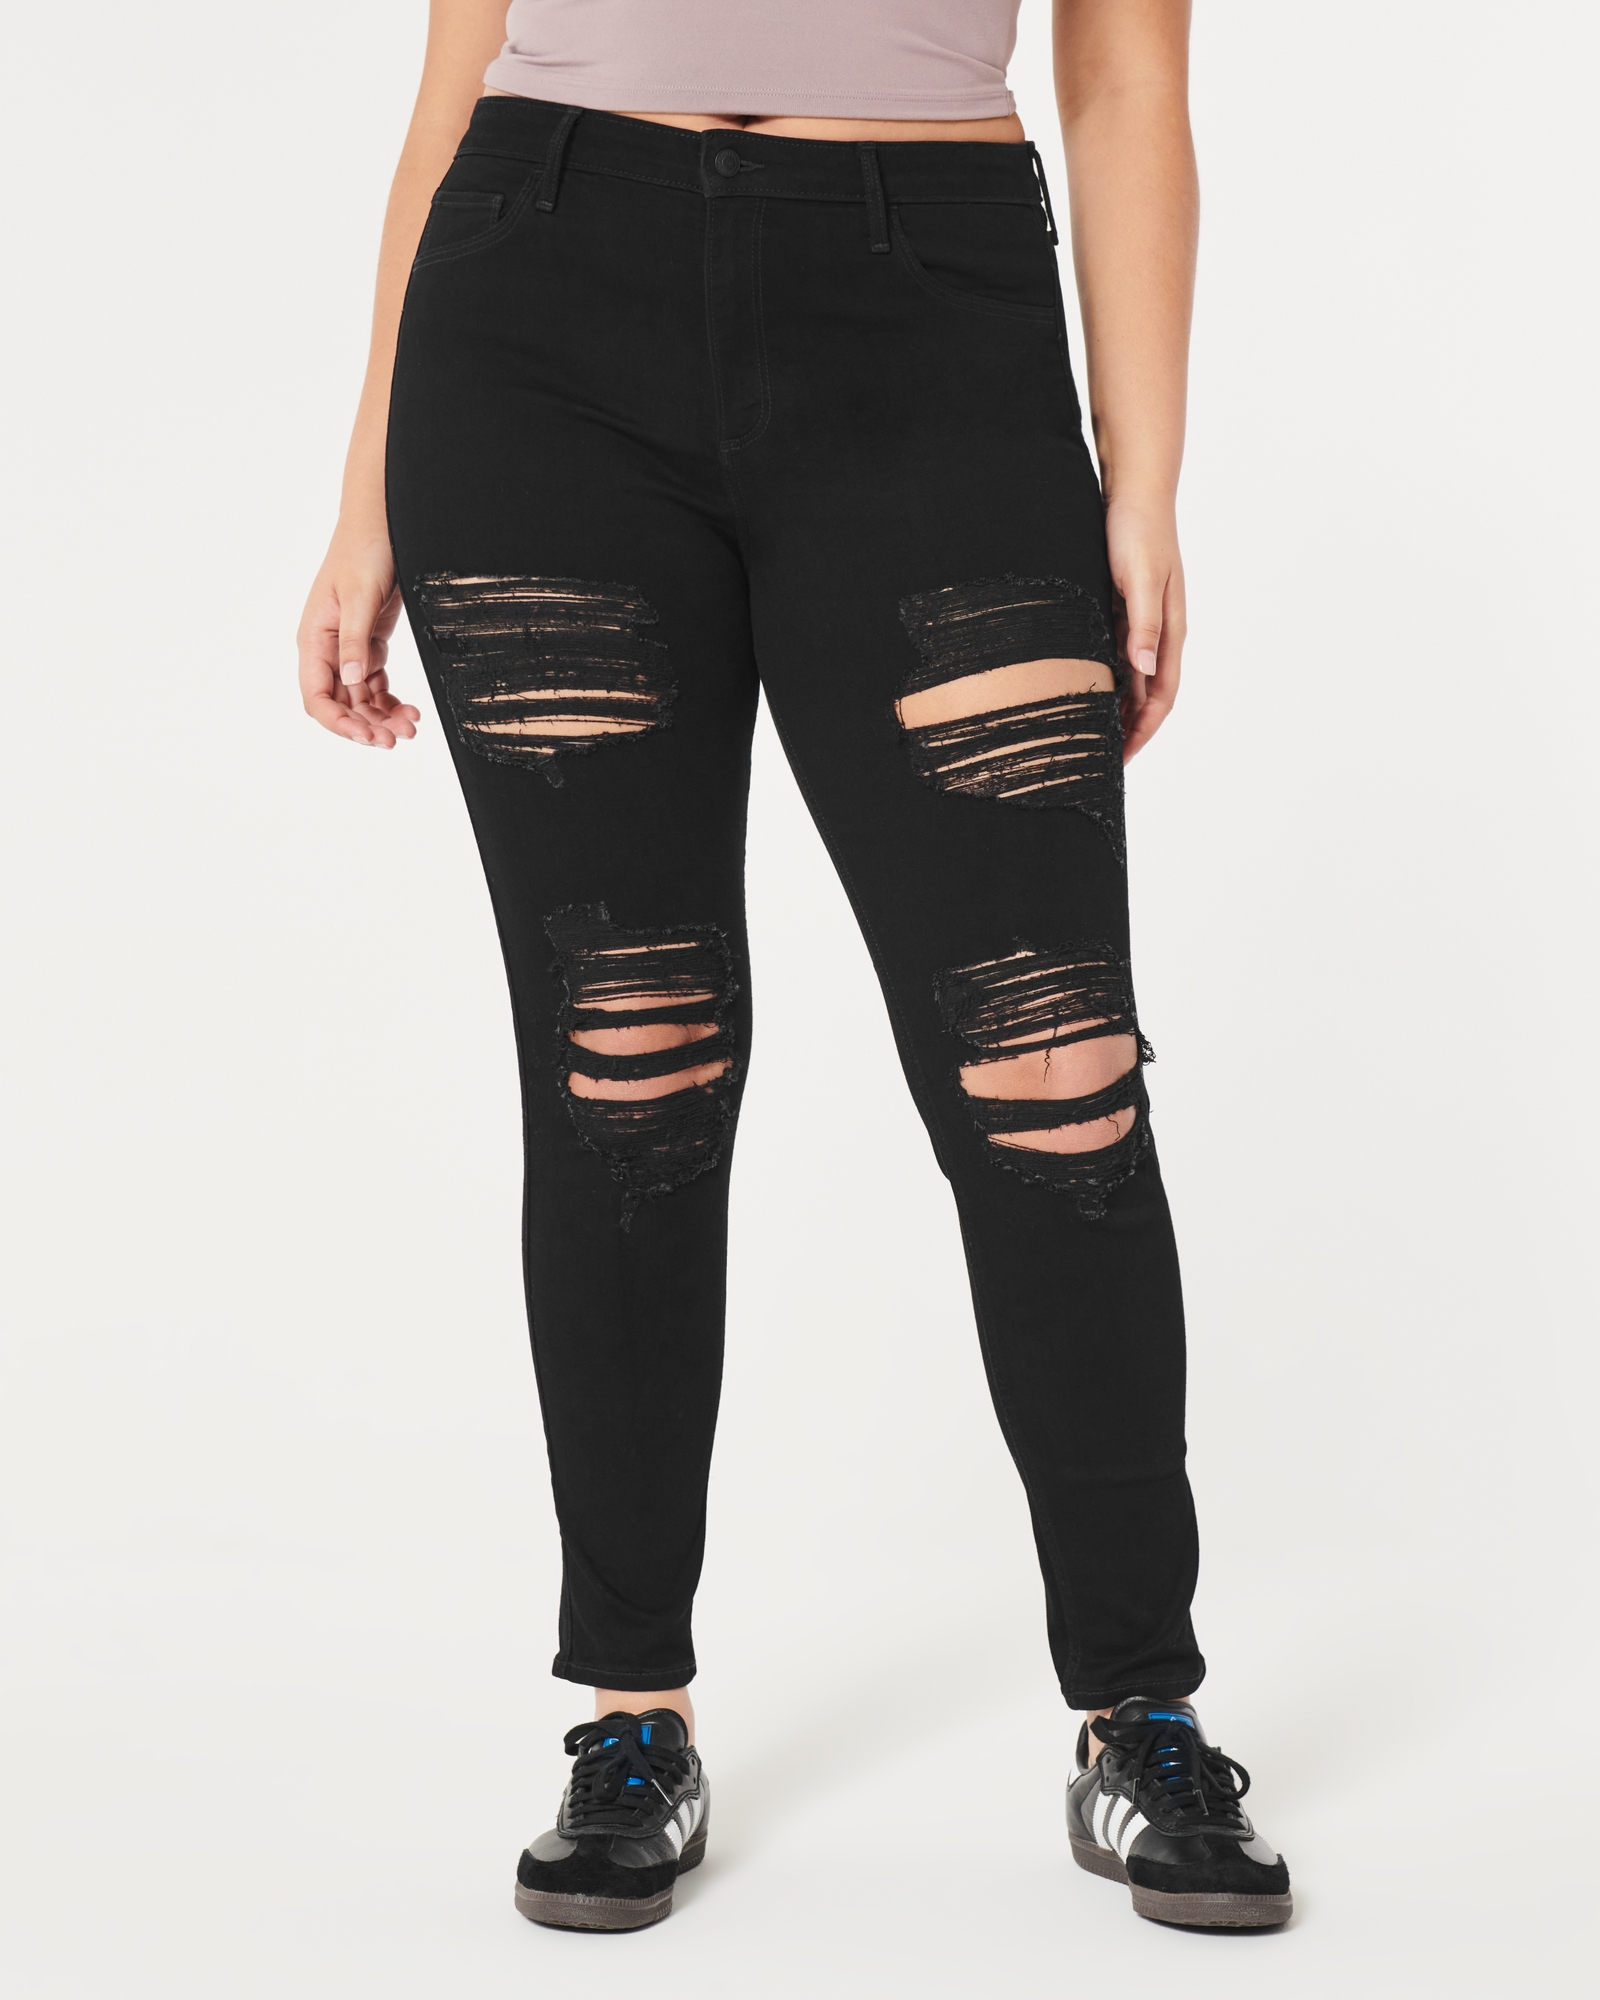 Hollister Curvy Fit Skinny Jeans in Blue